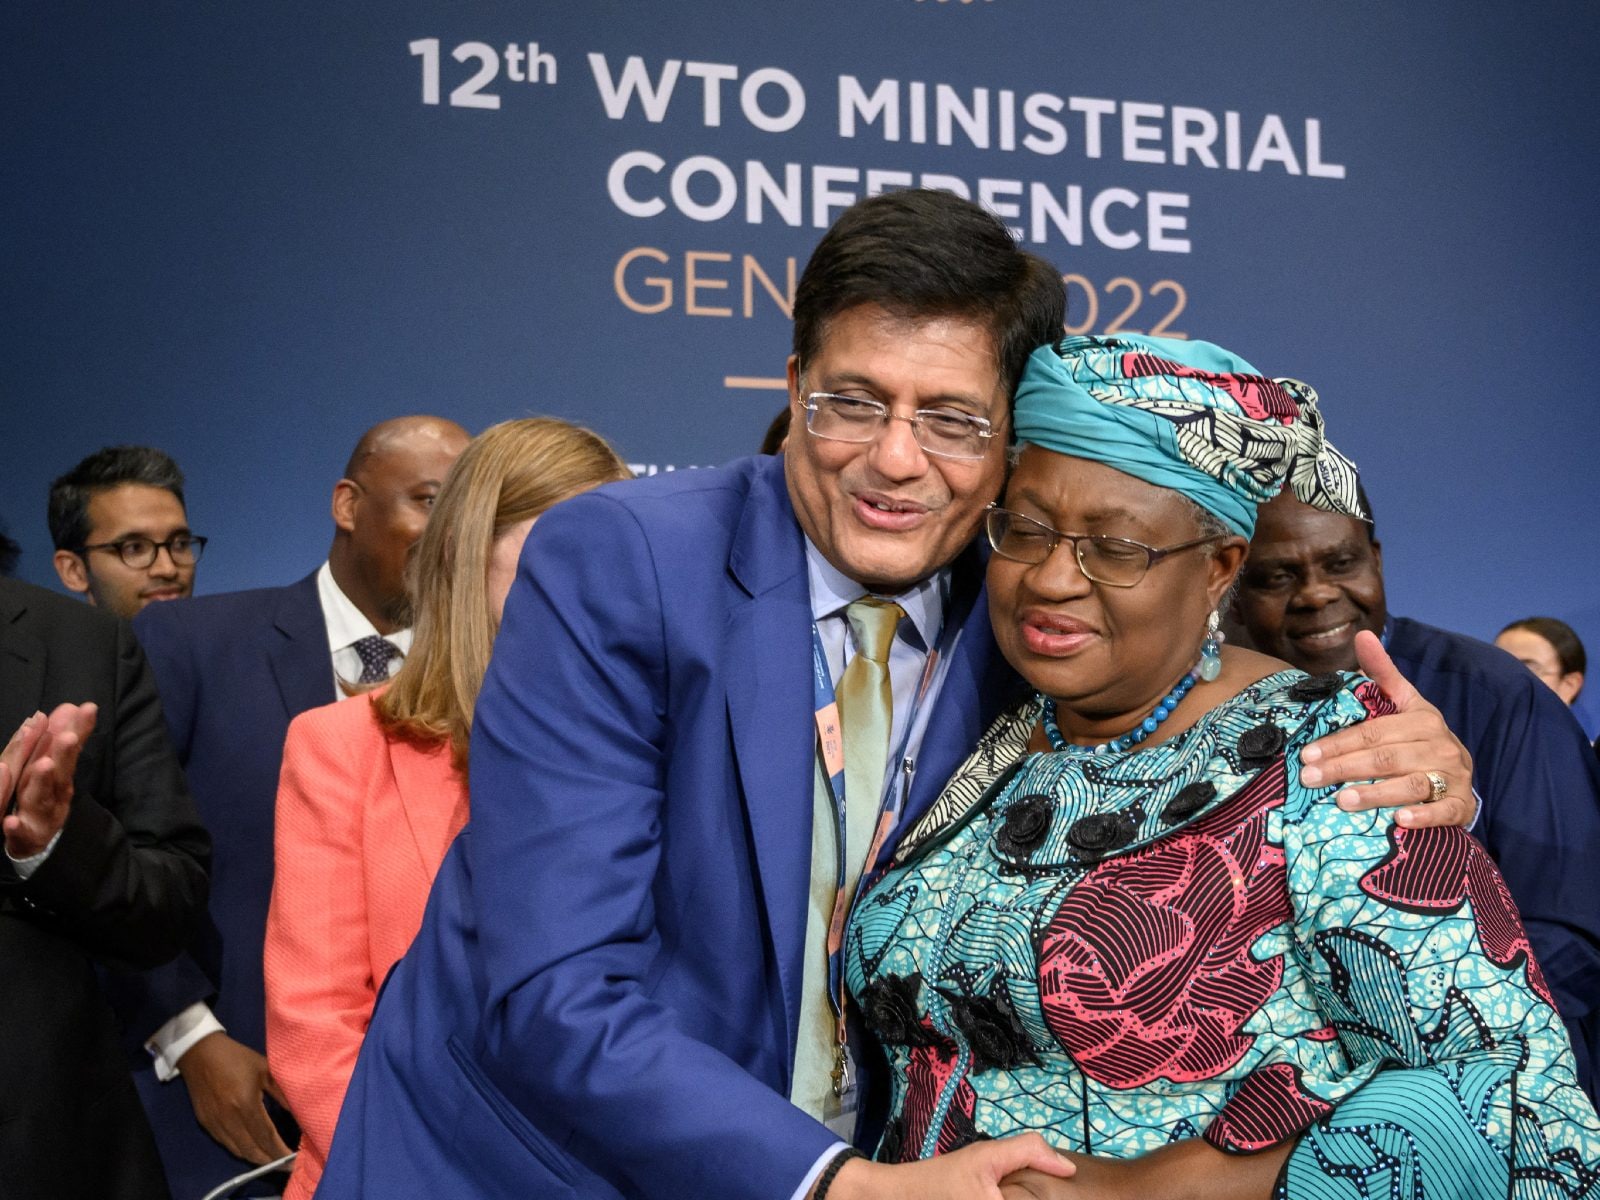 India Takes Up The Fight For Developing Economies, Set For Major Gains At WTO  Meet - News18